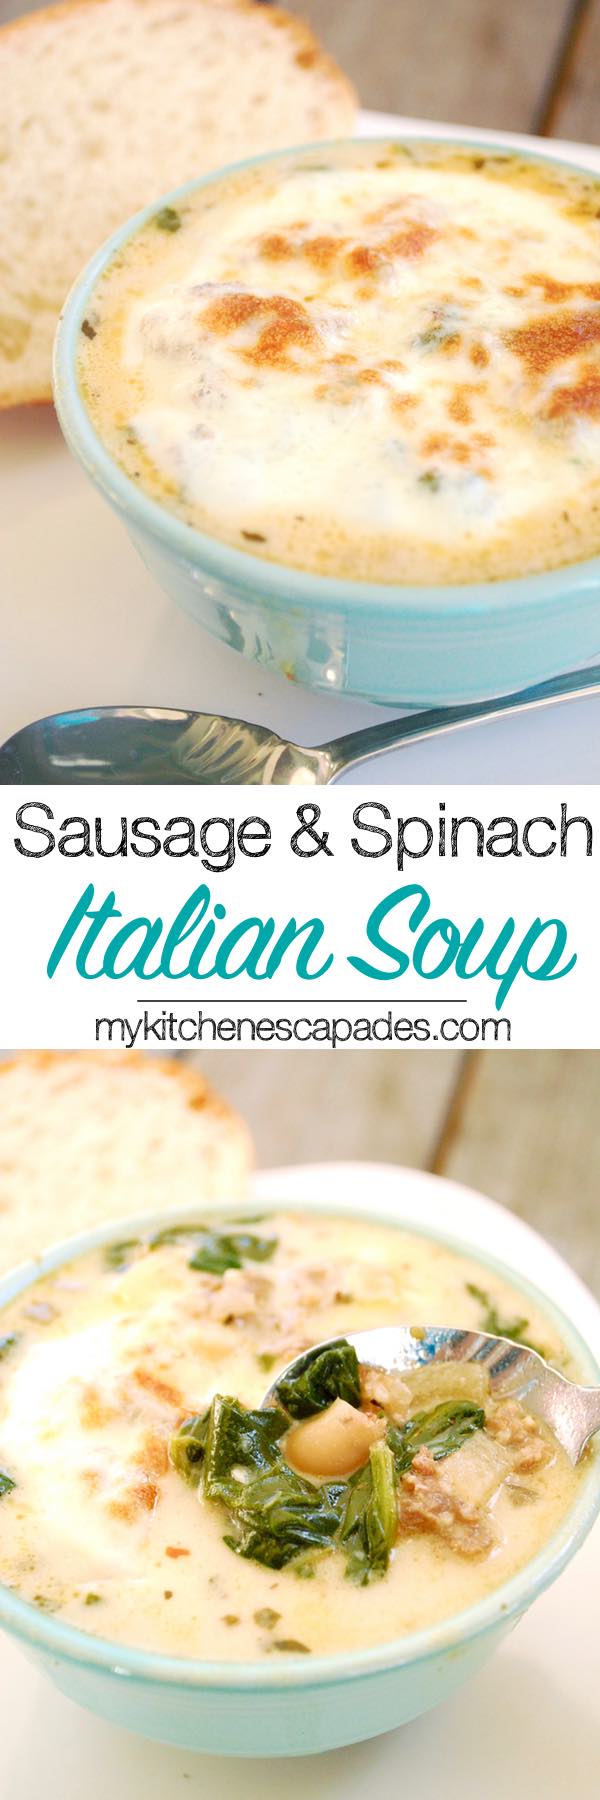 sausage-and-spinach-italian-soup